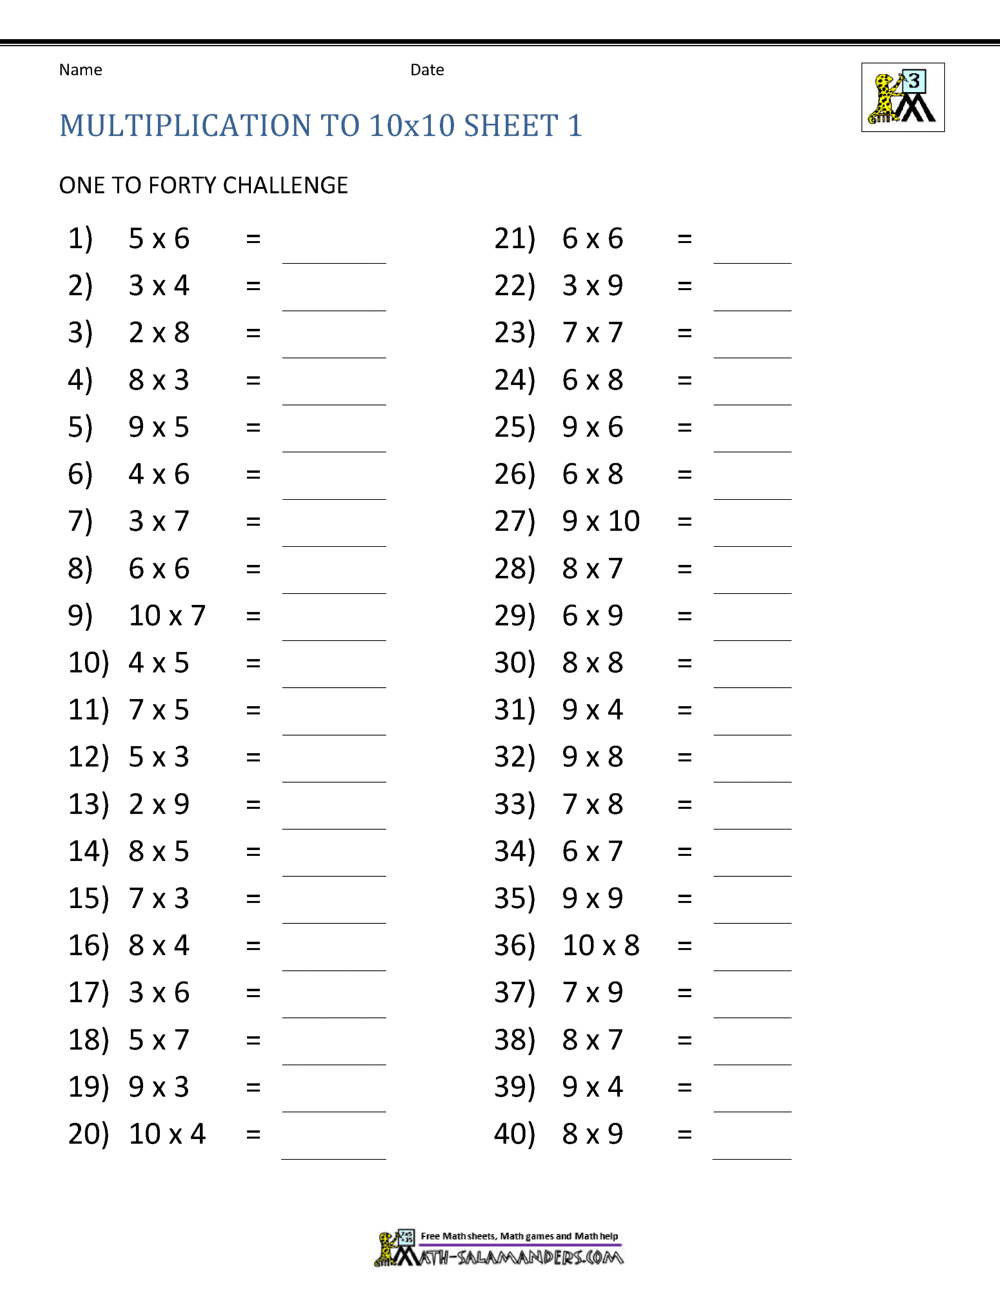 9-times-table-worksheet-with-answers